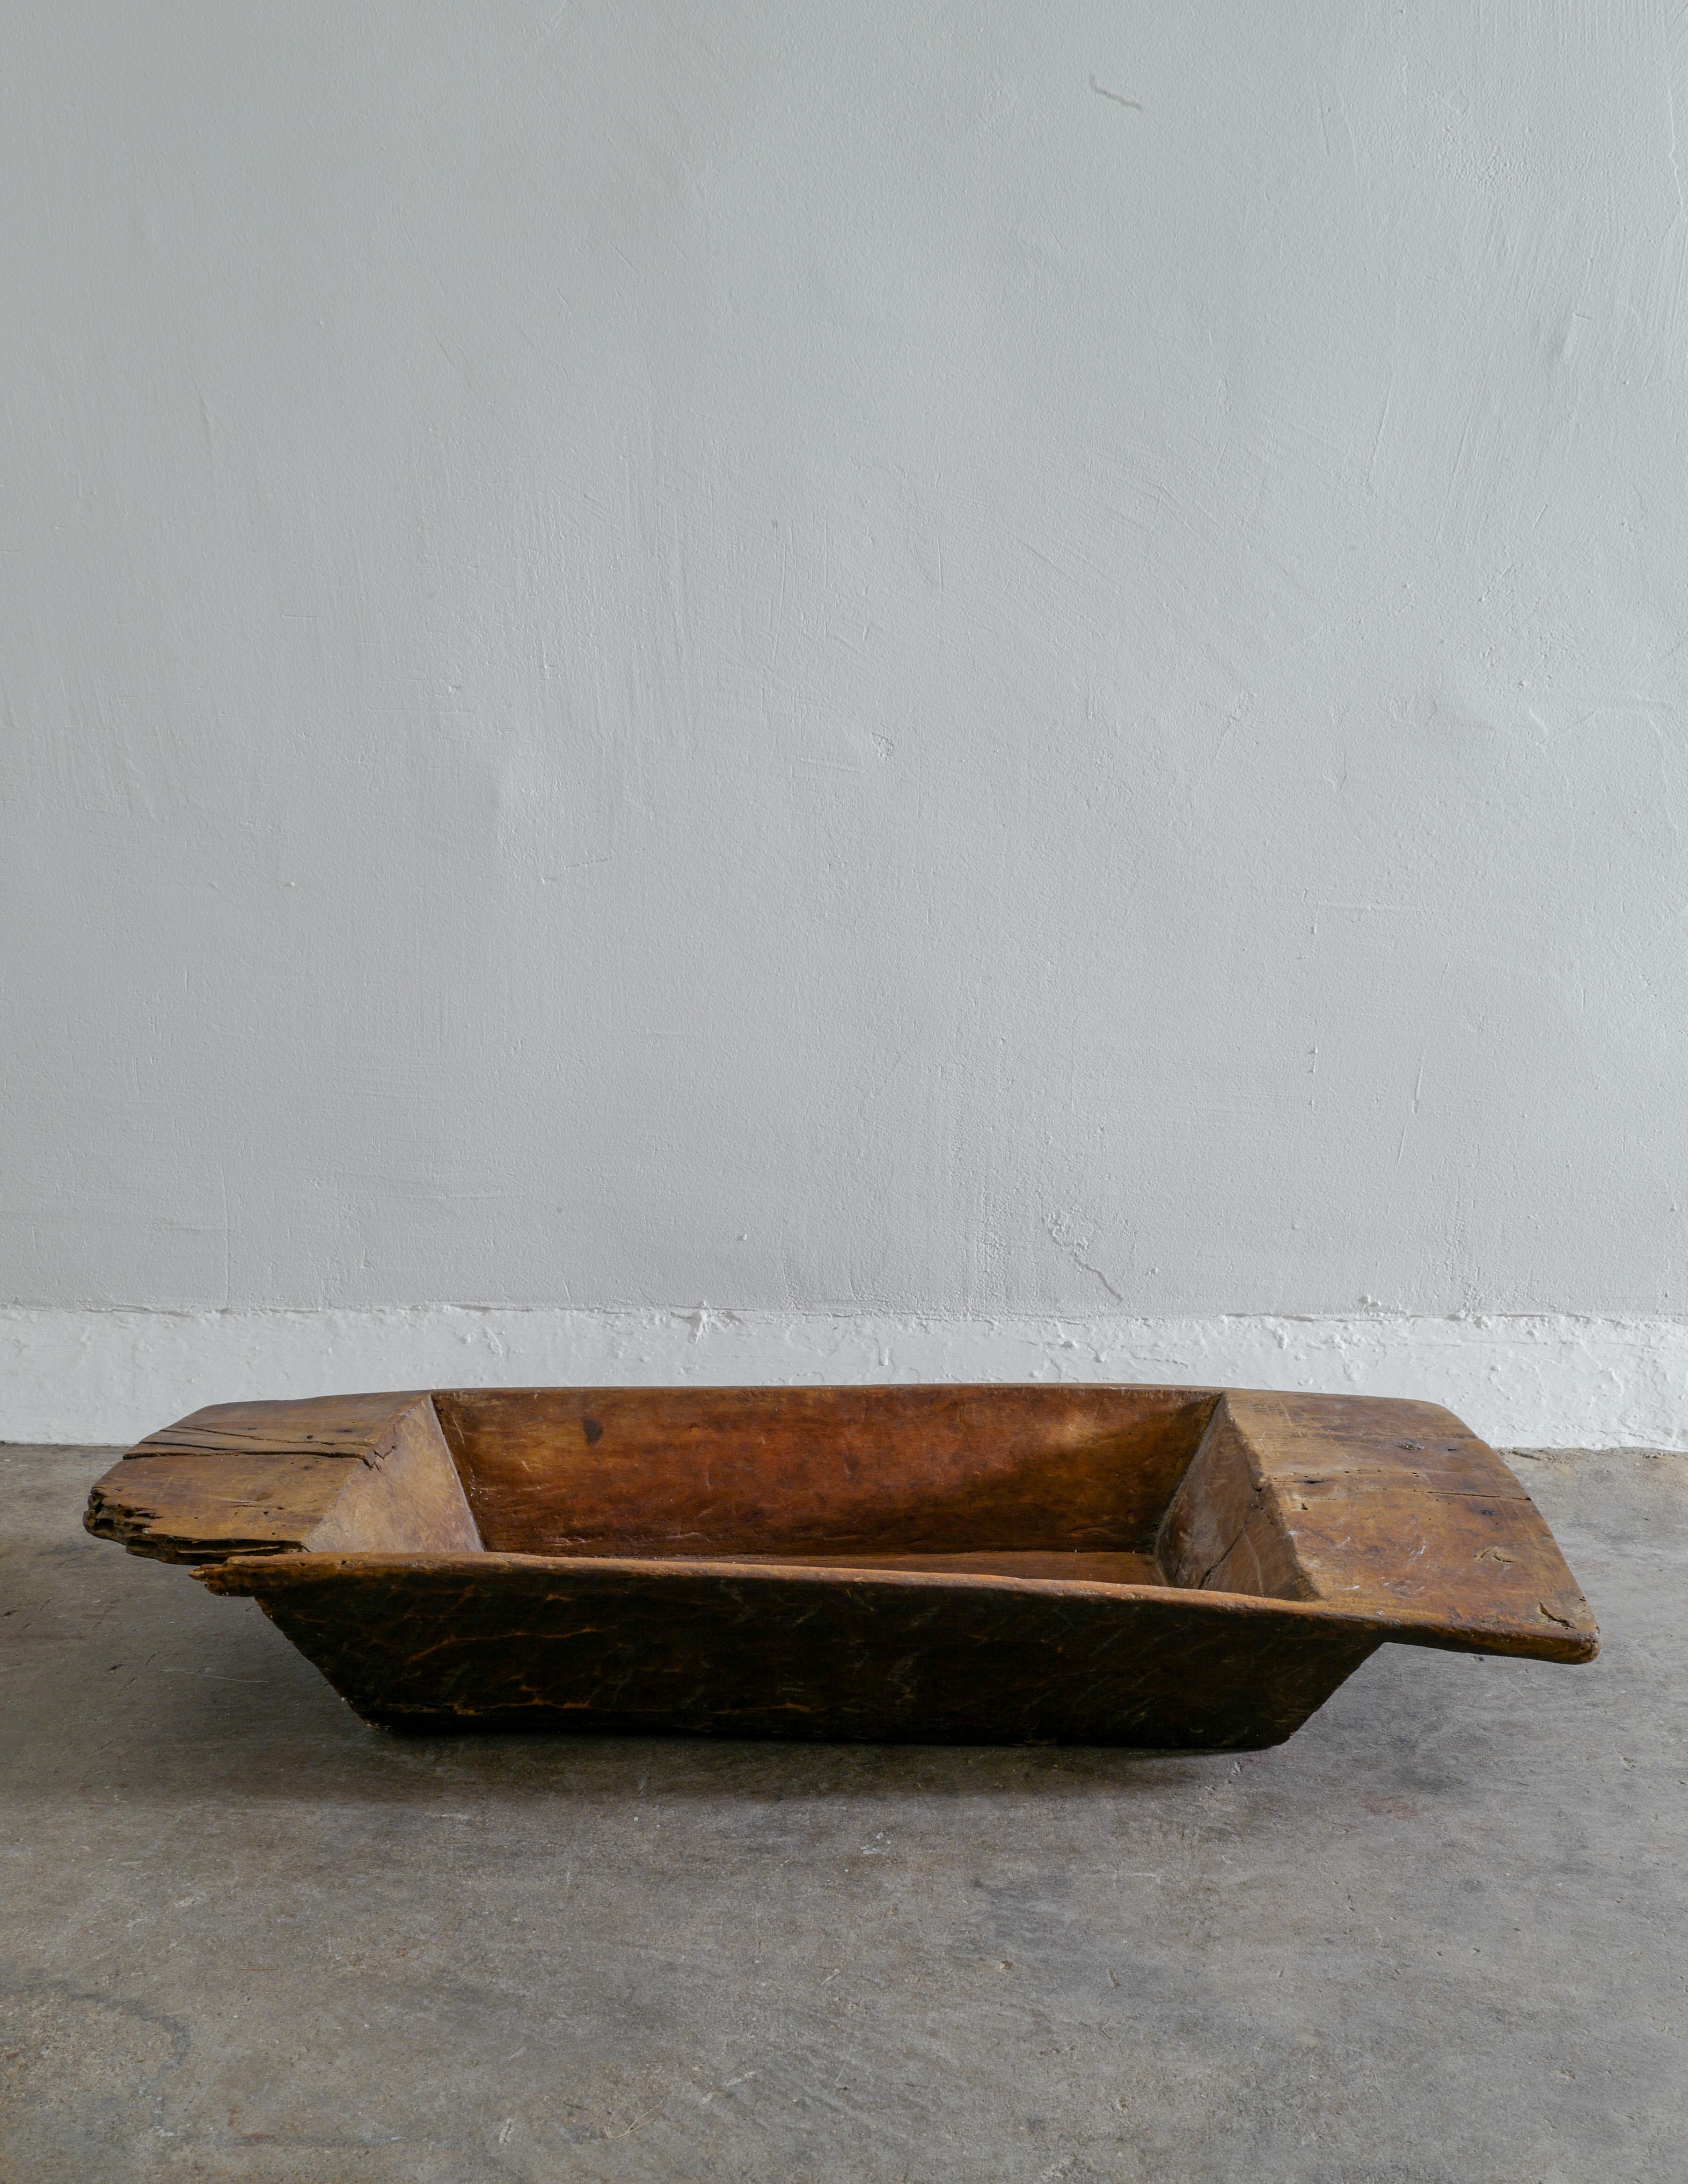 Rare and oversized wooden tray in a Brutalist and wabi sabi style produced in Sweden. In good vintage condition showing heavy patina from use and age. Nice dark brown color.